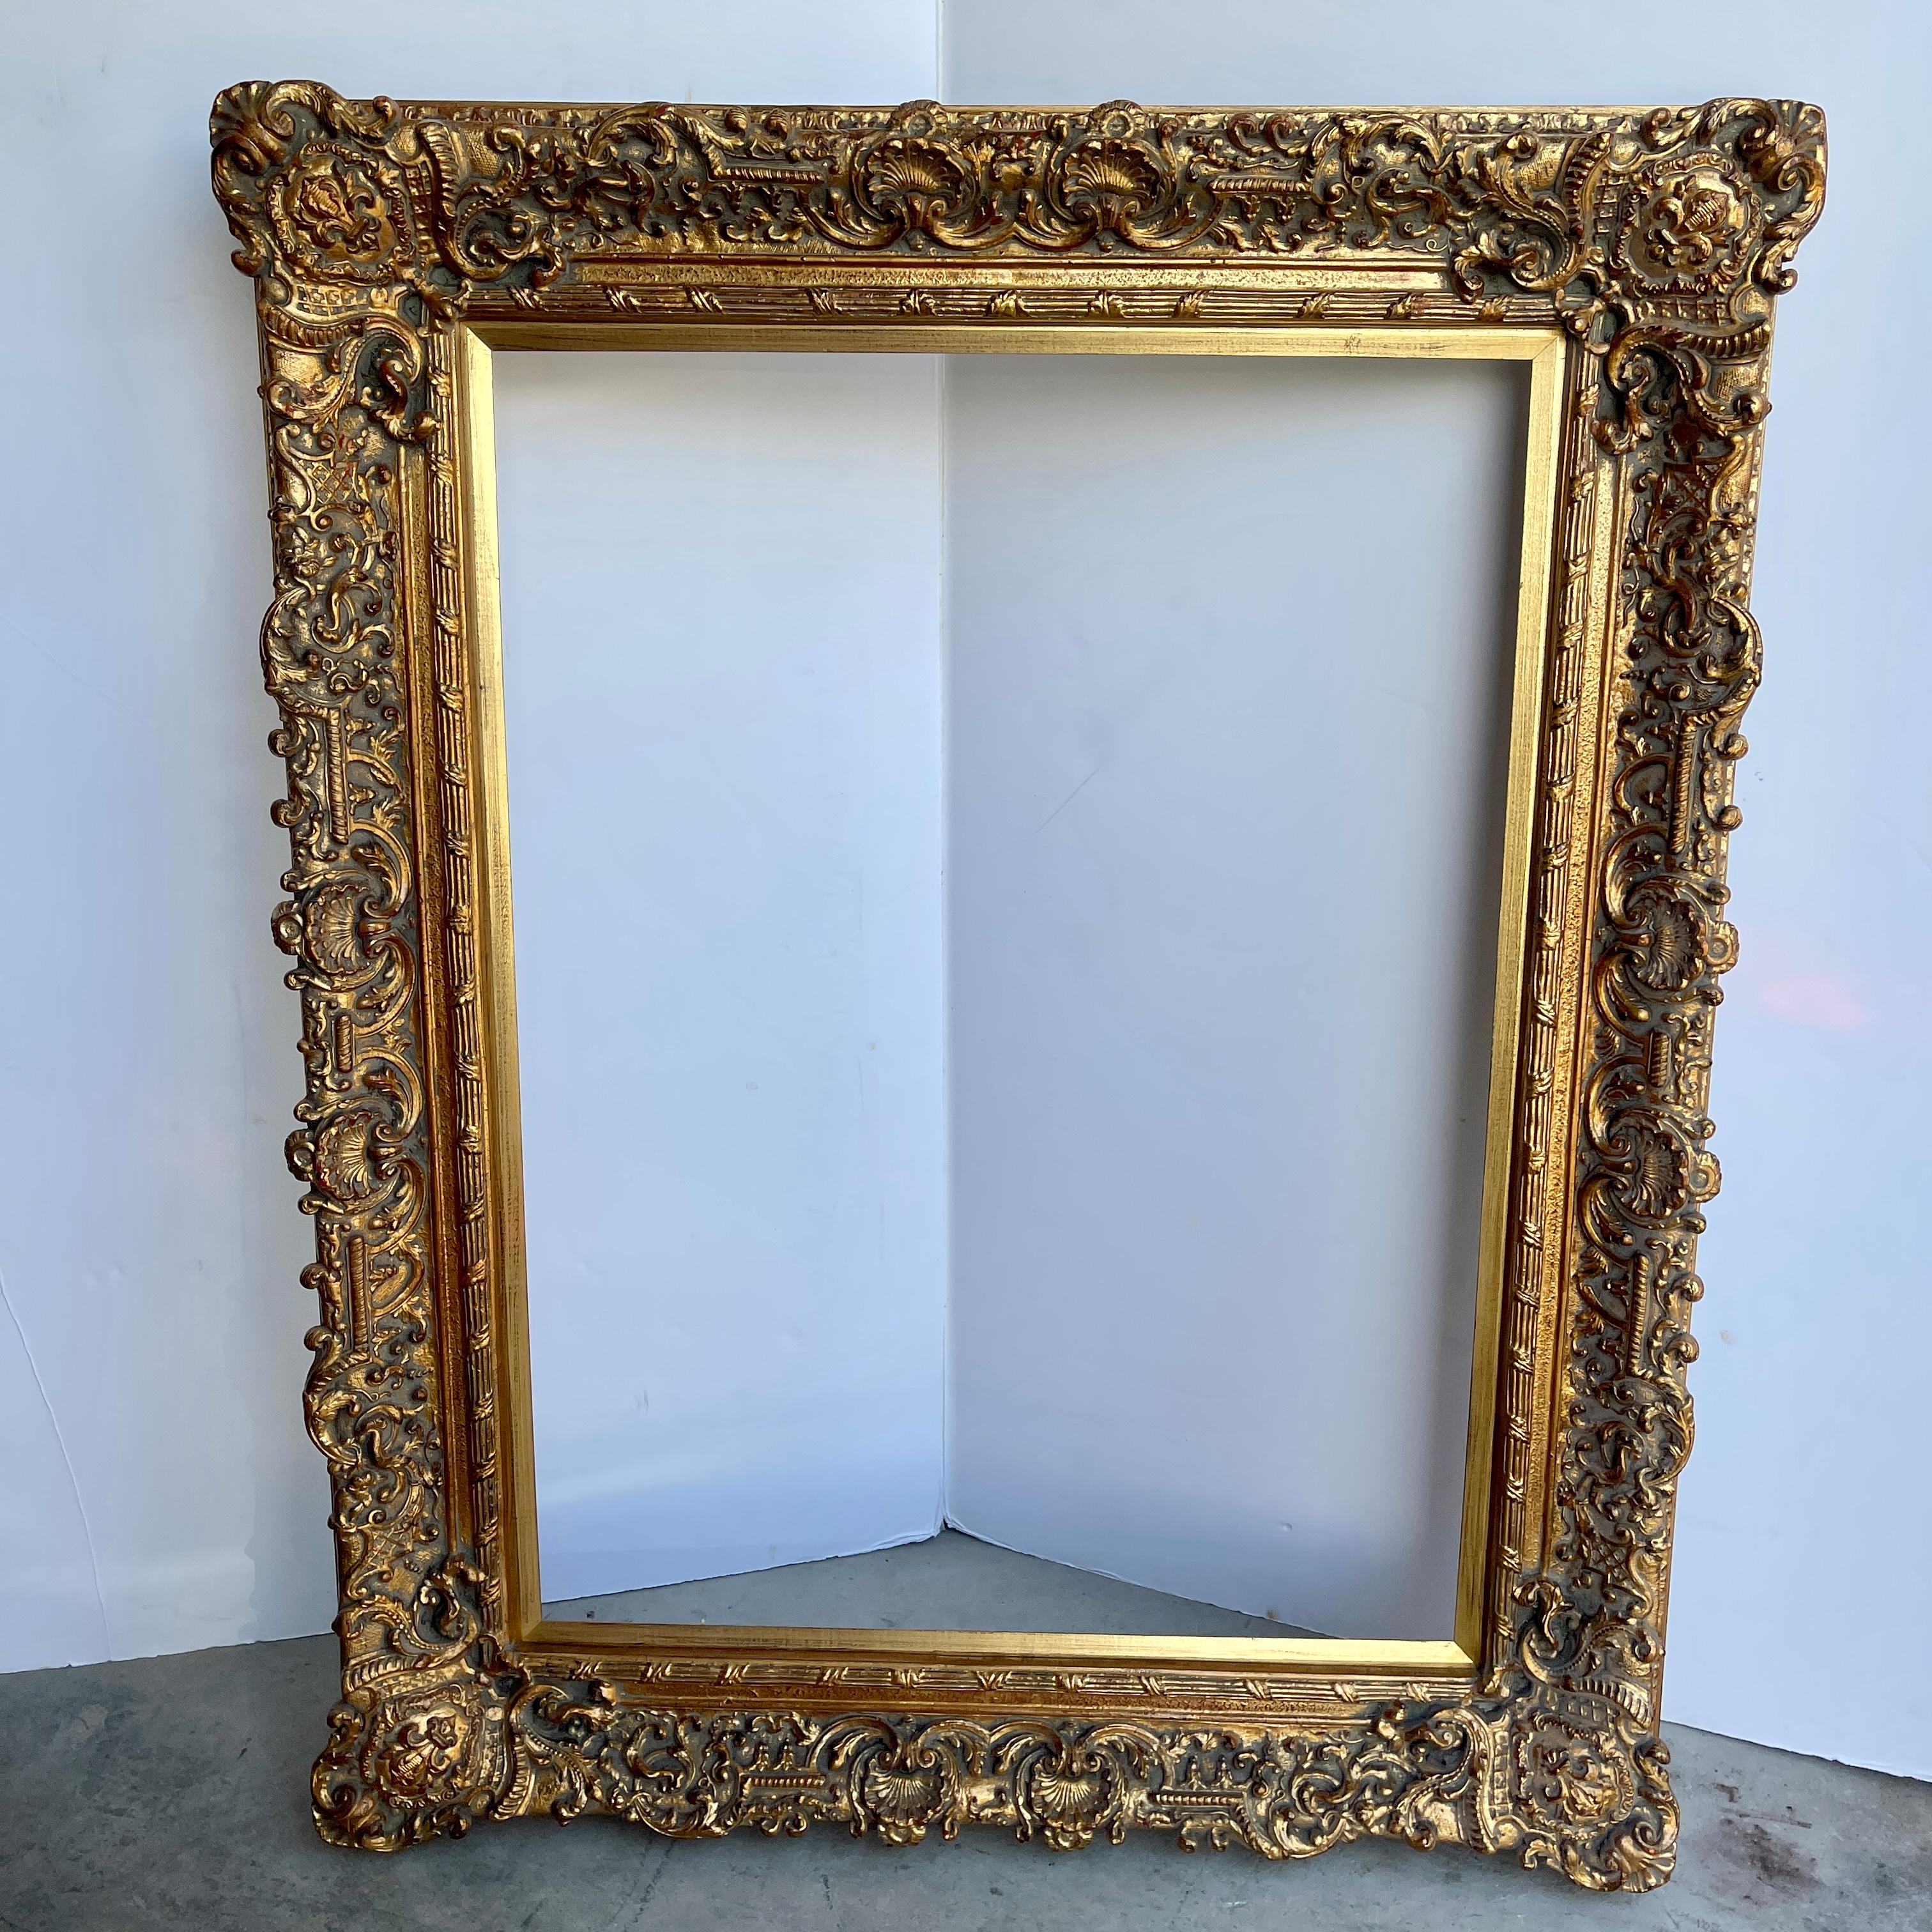 20th Century Large Ornate Carved Gilt Wood Frame, French Rococo Style  For Sale 1